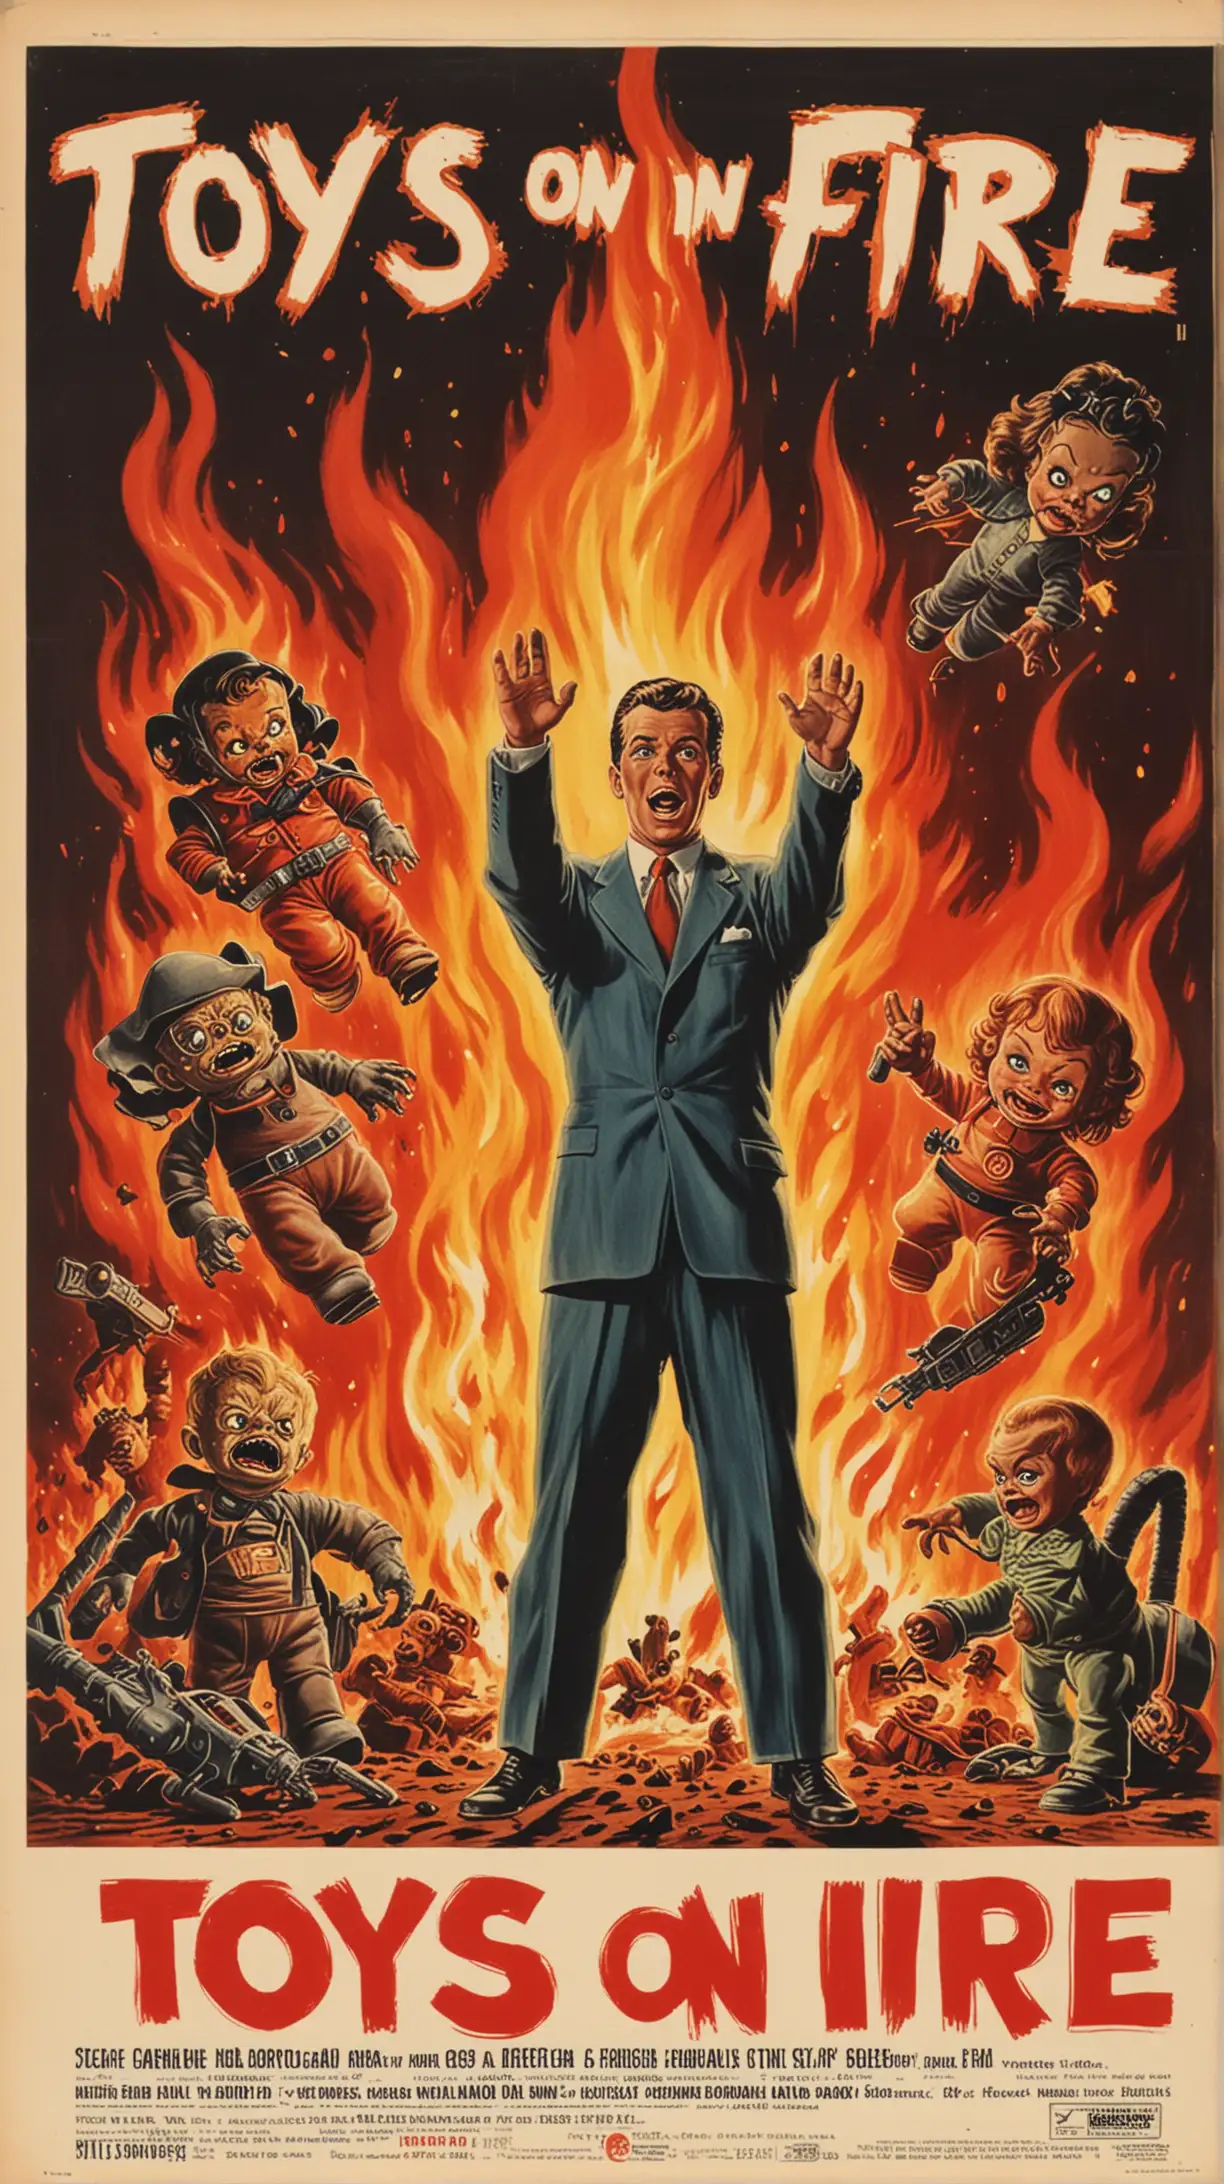 toys on fire
[style: 1950s horror poster]